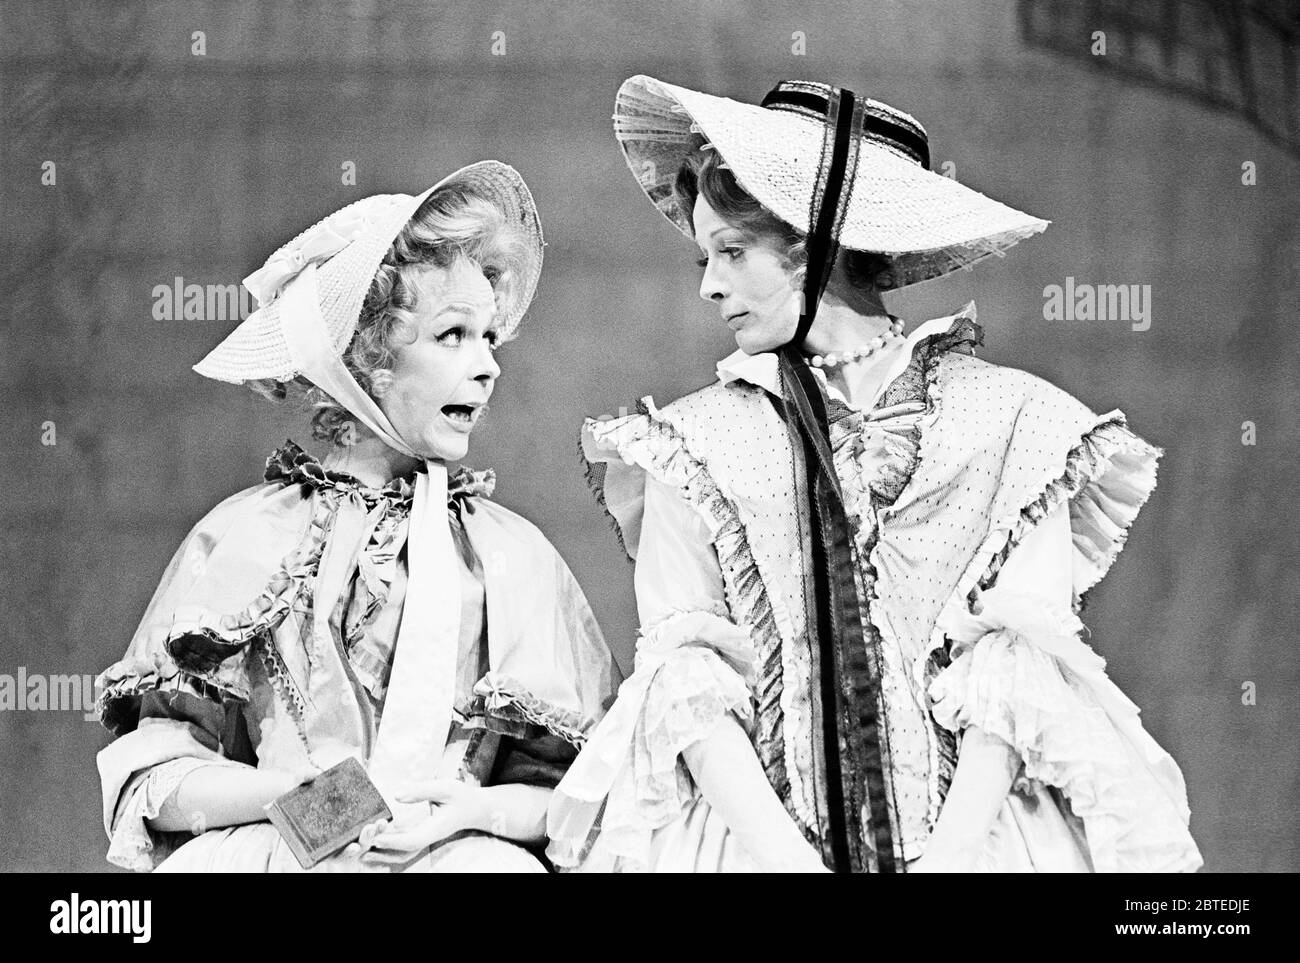 l-r: Sheila Reid (Dorinda), Maggie Smith (Mrs Sullen) in THE BEAUX' STRATAGEM by George Farquhar at the The National Theatre, The Old Vic, London SE1  08/04/197  design: Rene Allio  lighting: Andy Phillips  director: William Gaskill Stock Photo